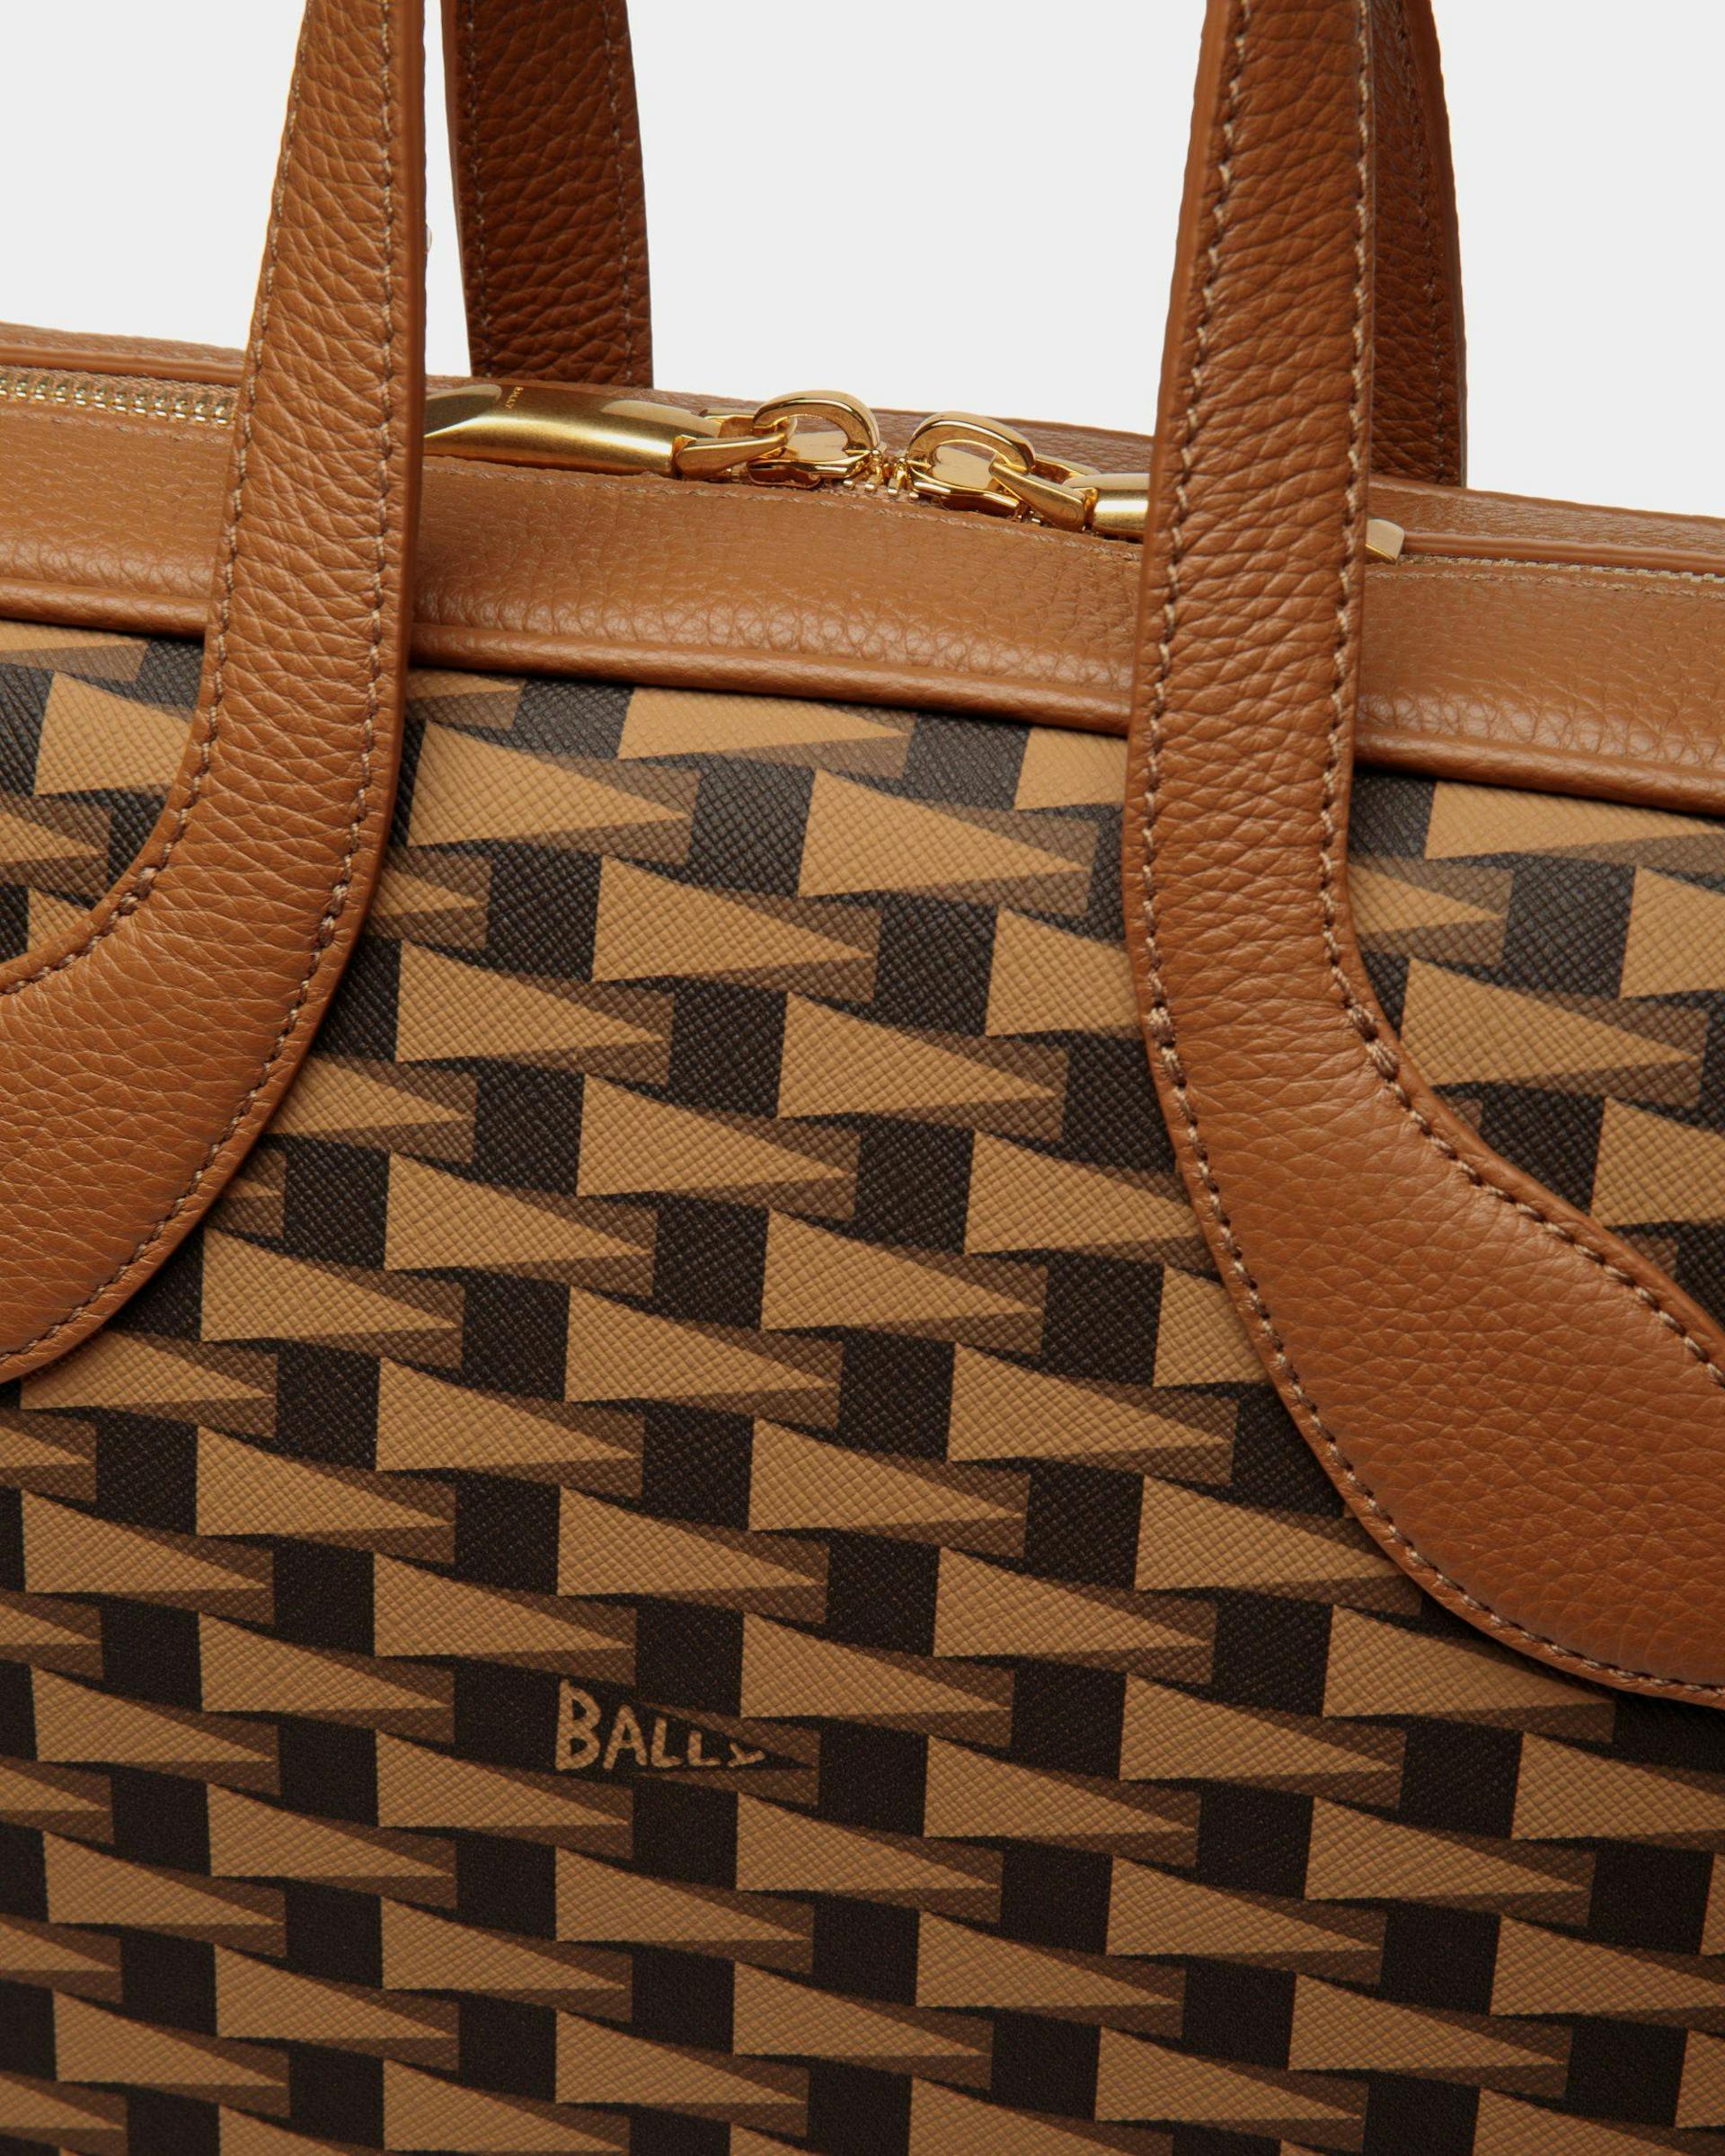 Men's Pennant Briefcase In Desert Leather And TPU | Bally | Still Life Detail